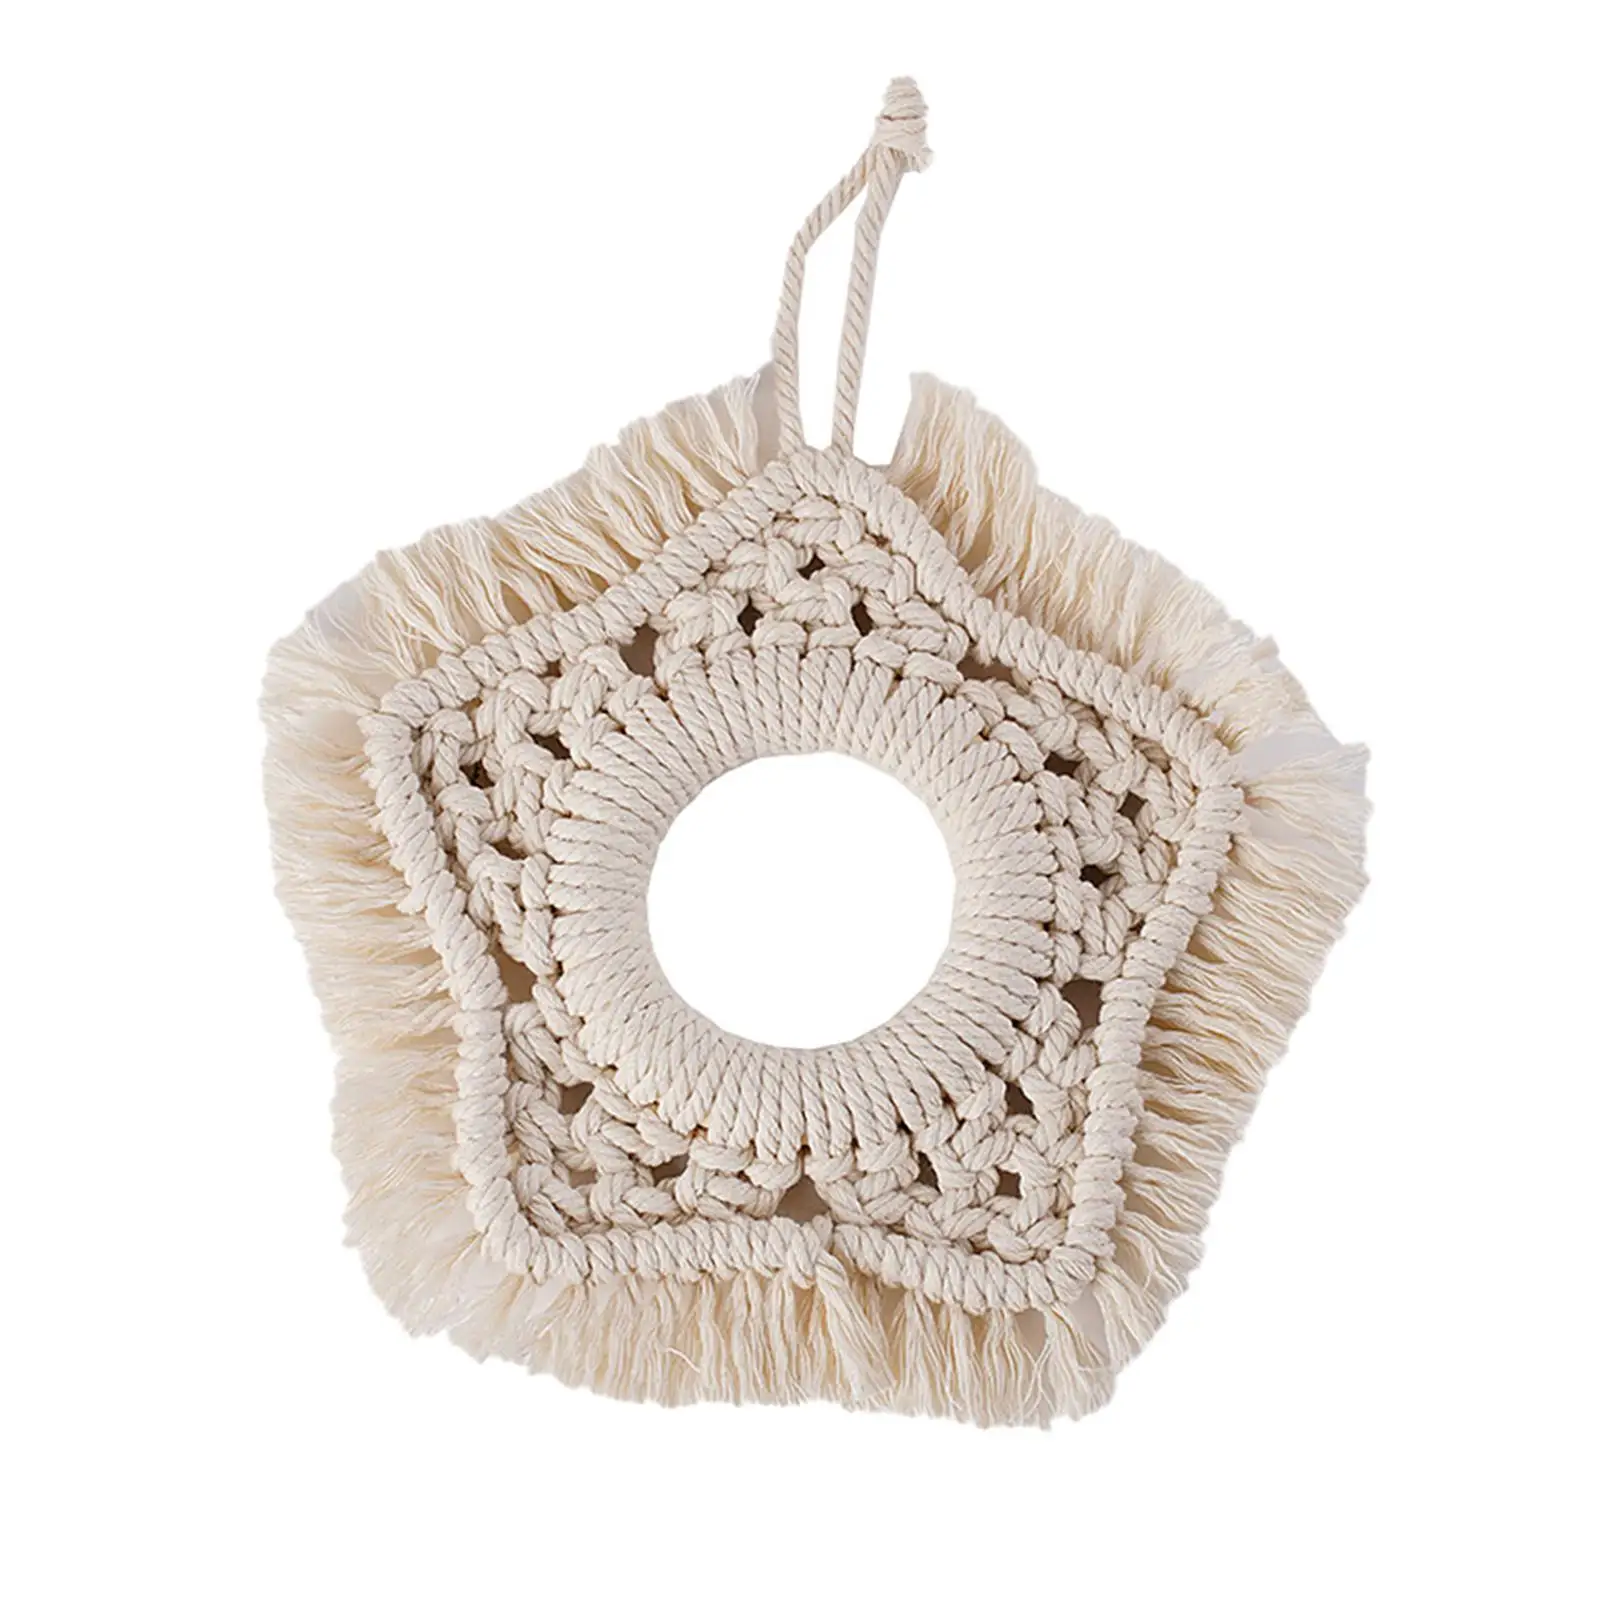 Chic Macrame Woven Wall Hanging Bohemian Crafts Pendant for Dorm Bedroom Wedding Decoration